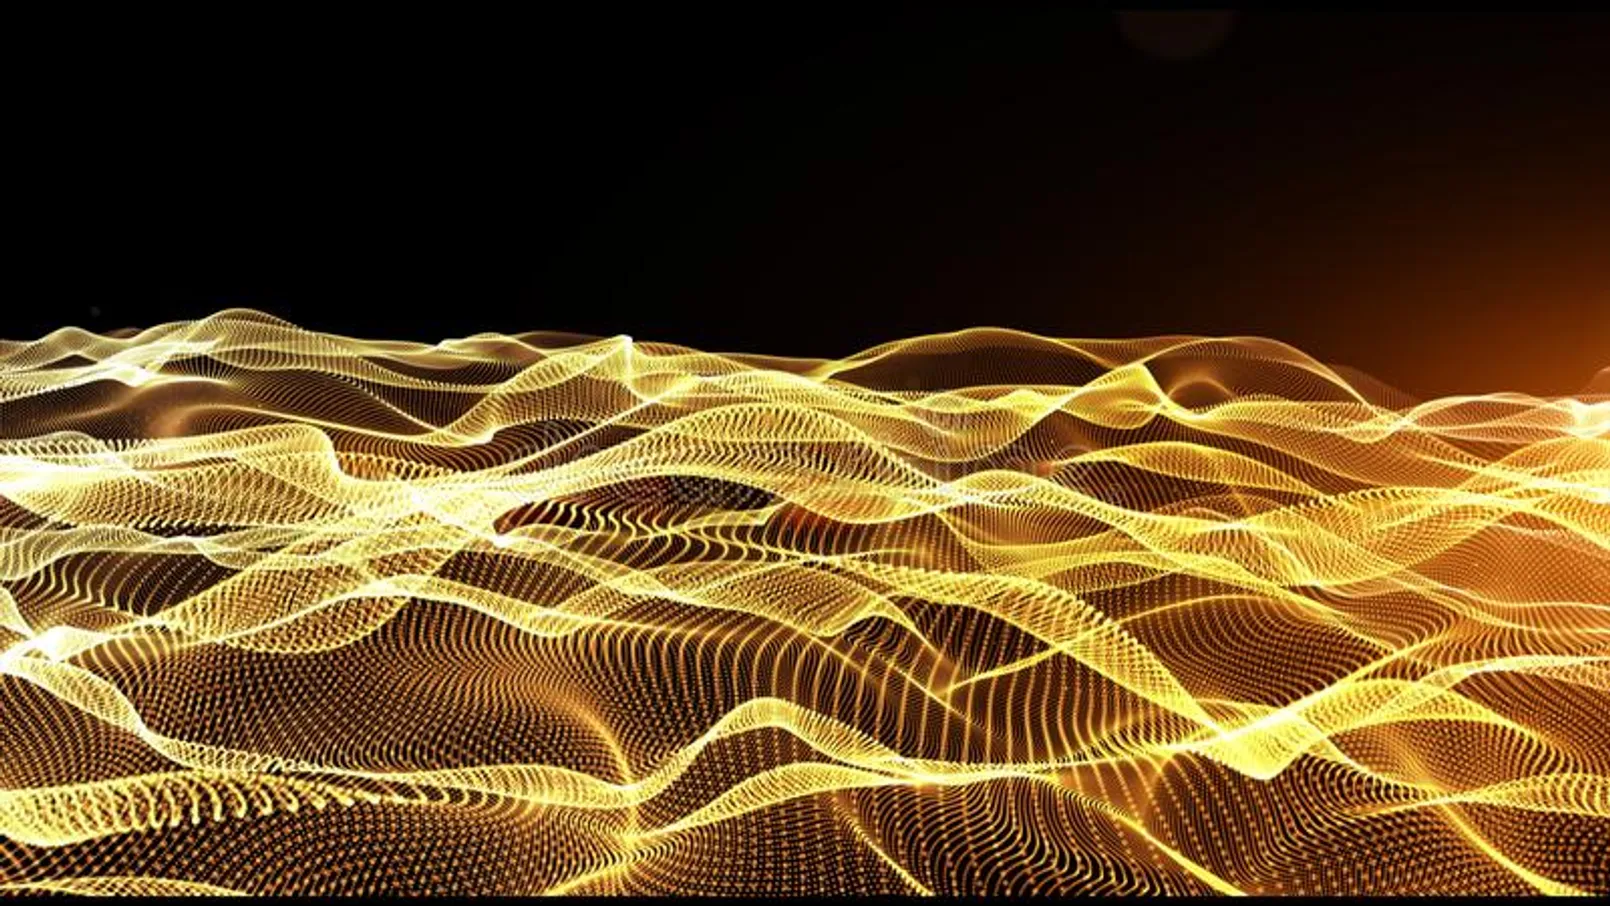 Abstract Gold Color Digital Particles Wave Bokeh Light Background 145893783.jpg